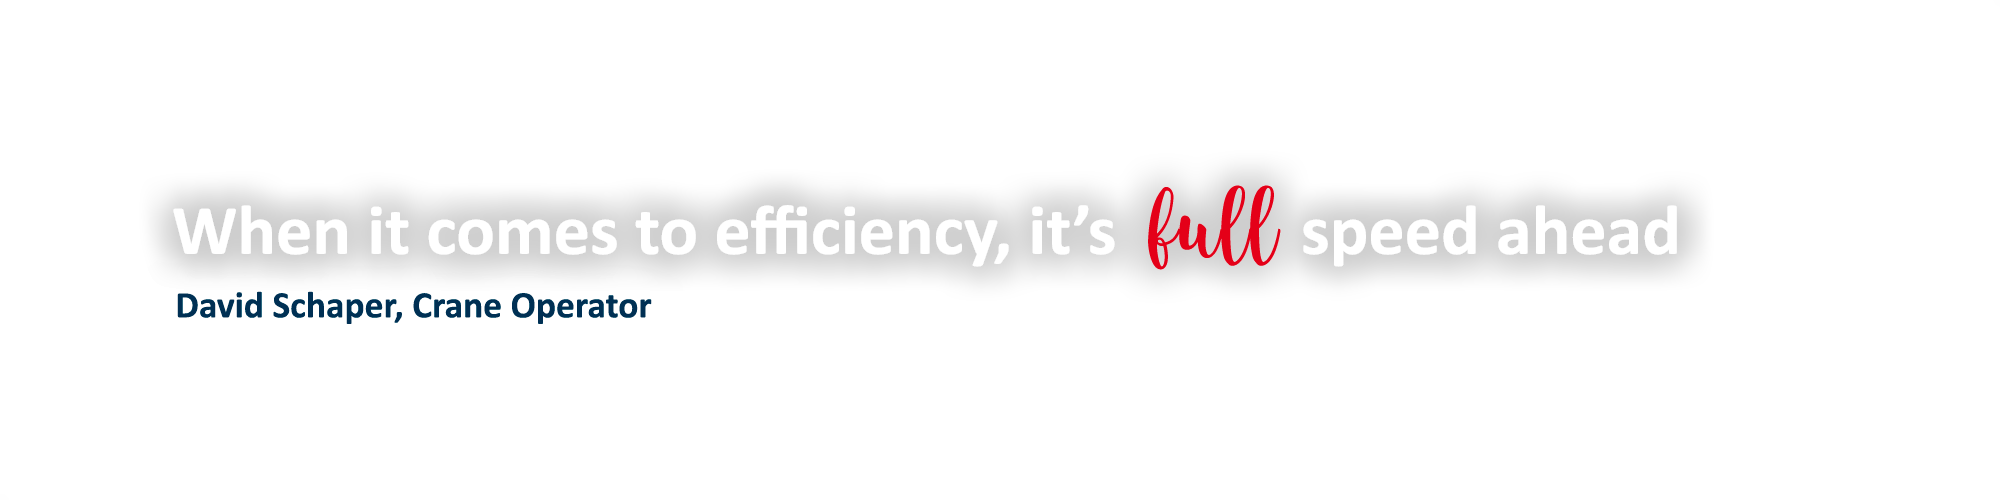 When it comes to efficiency, it's full speed ahead